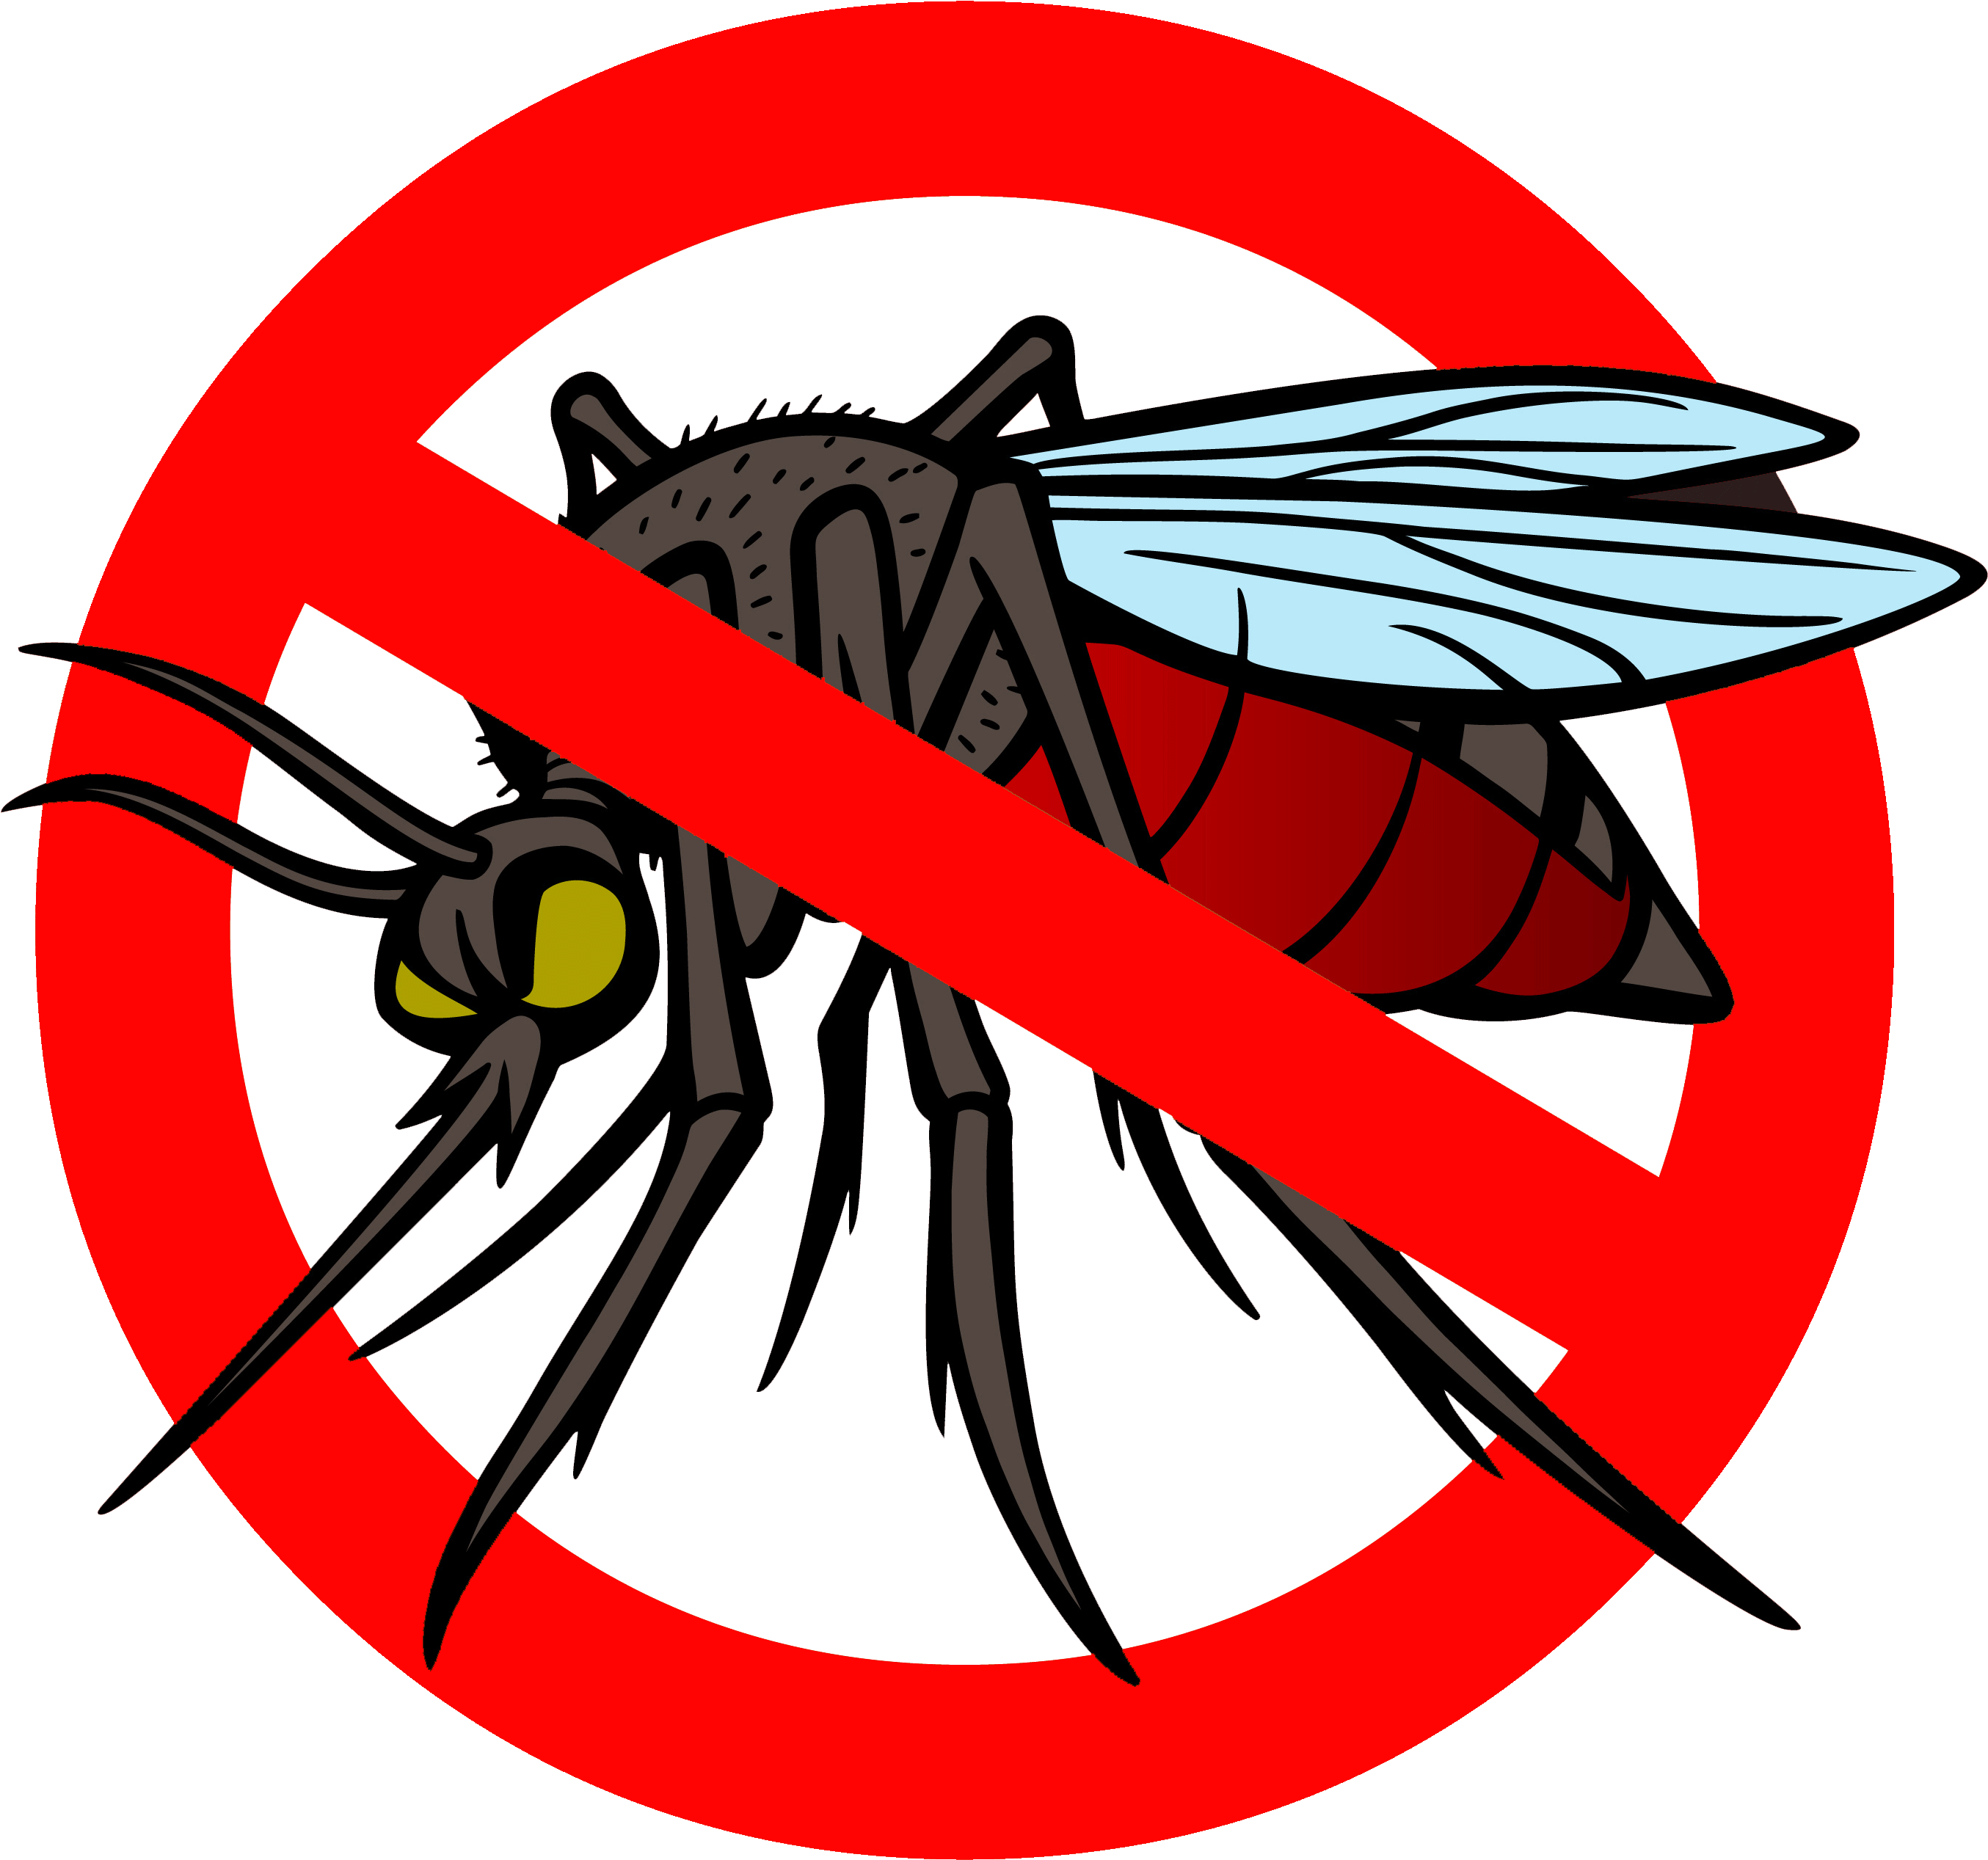 No Mosquito Sign Graphic